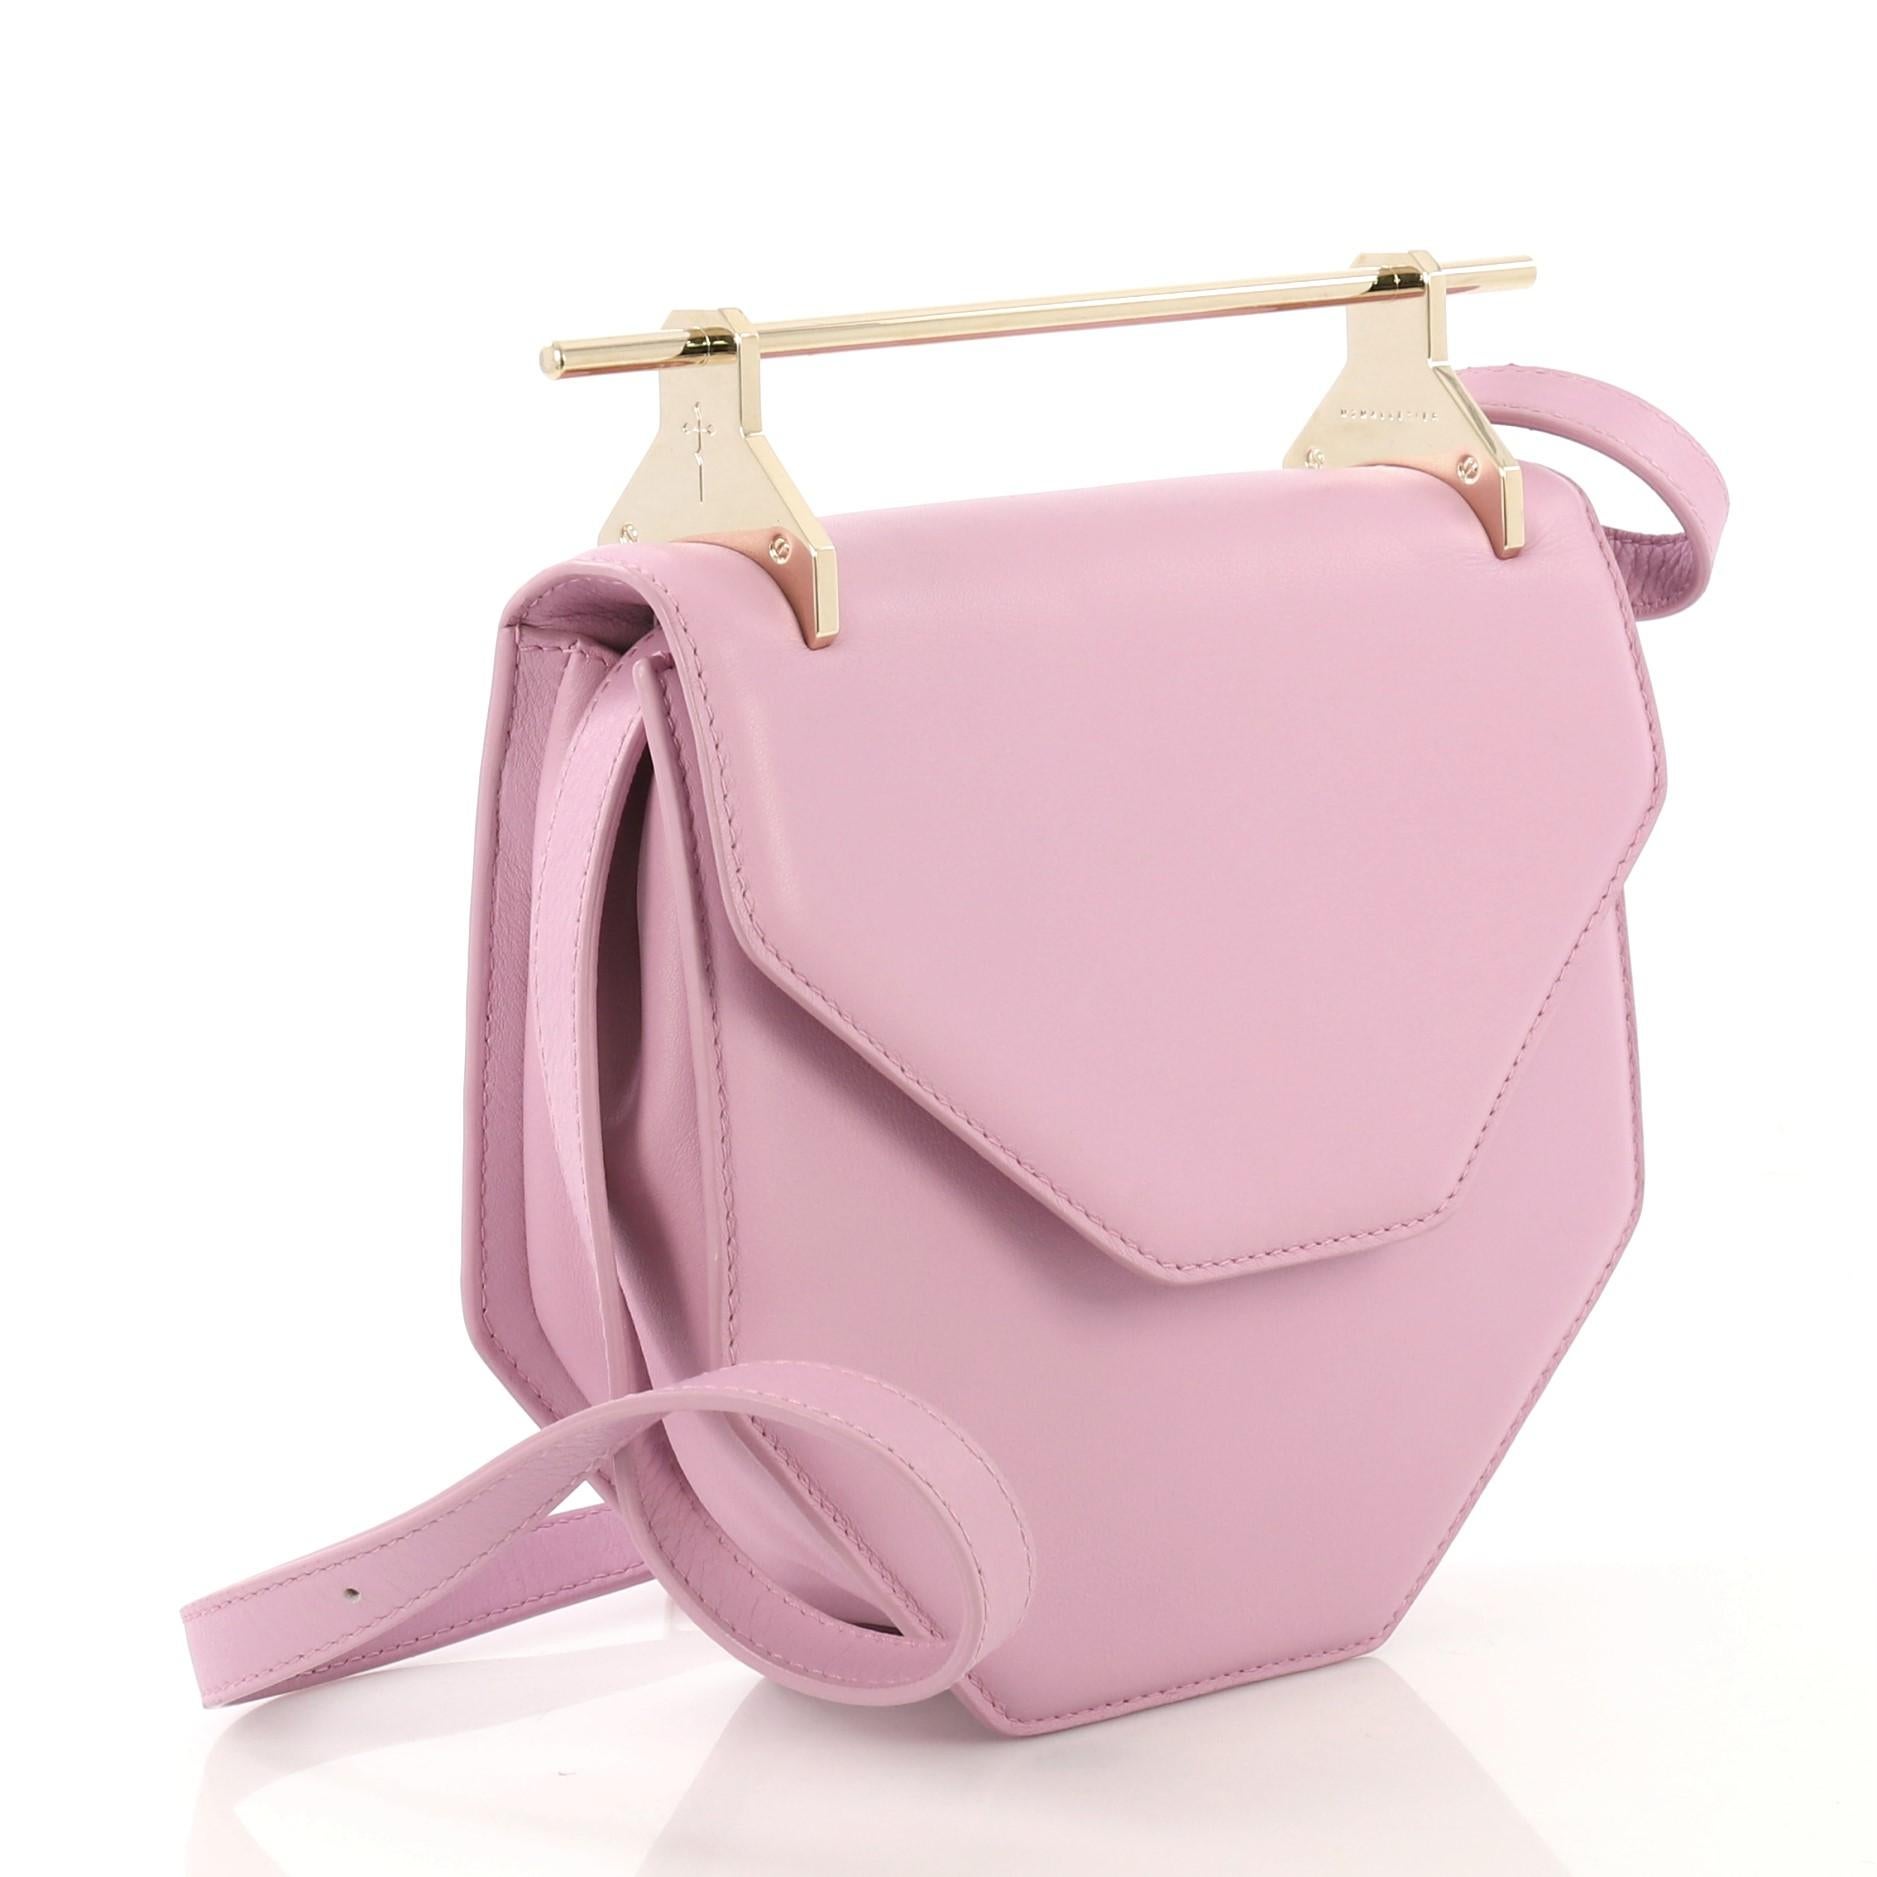 This M2Malletier Amor Fati Shoulder Bag Leather, crafted in pink leather, features the label's signature gold-tone 